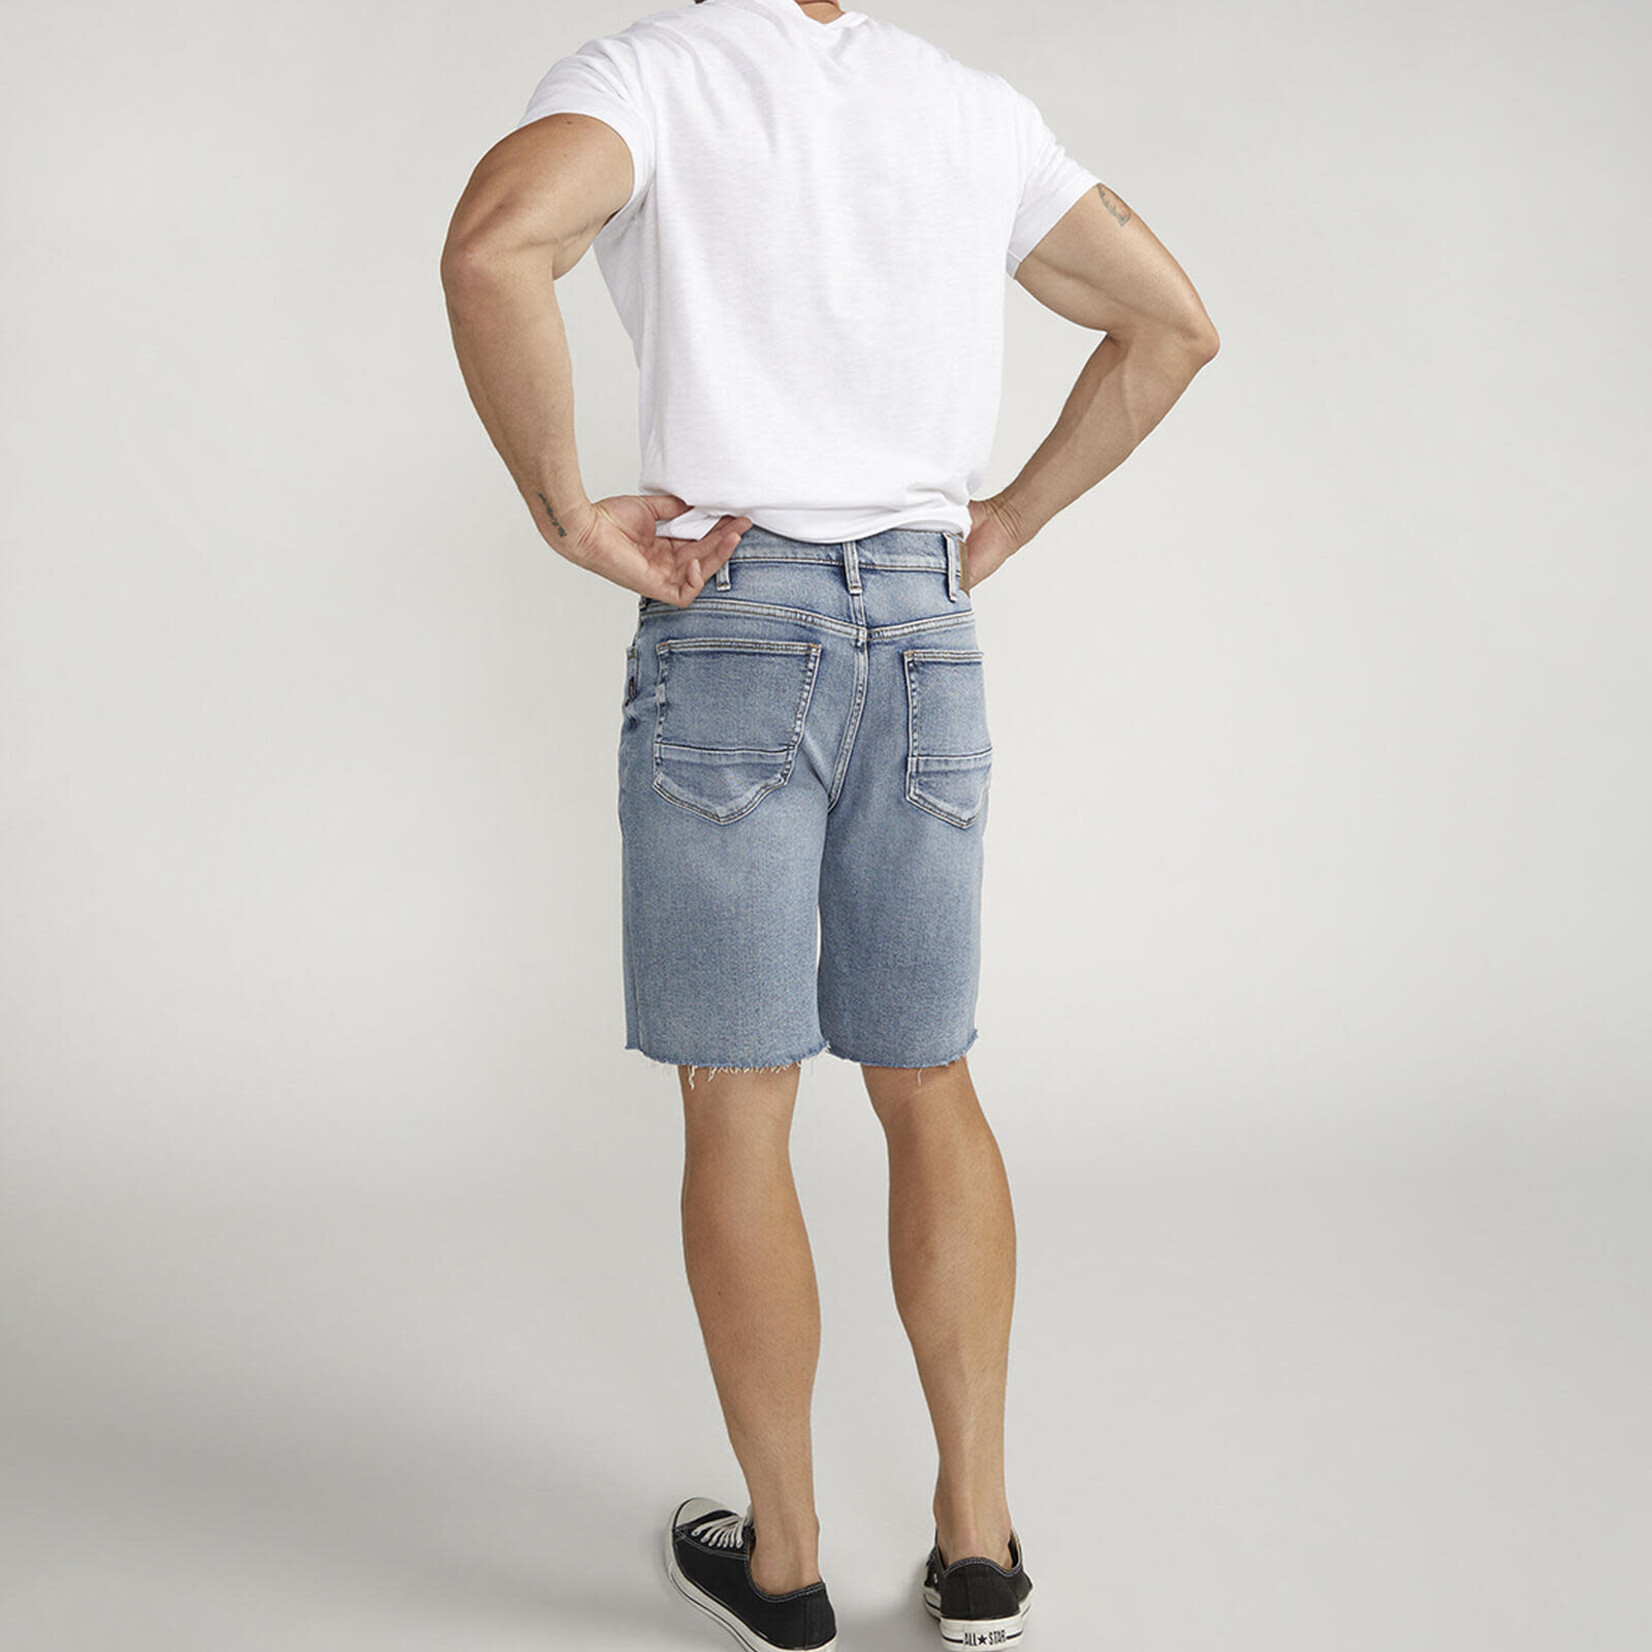 Silver Jeans Classic Fit Jean Shorts